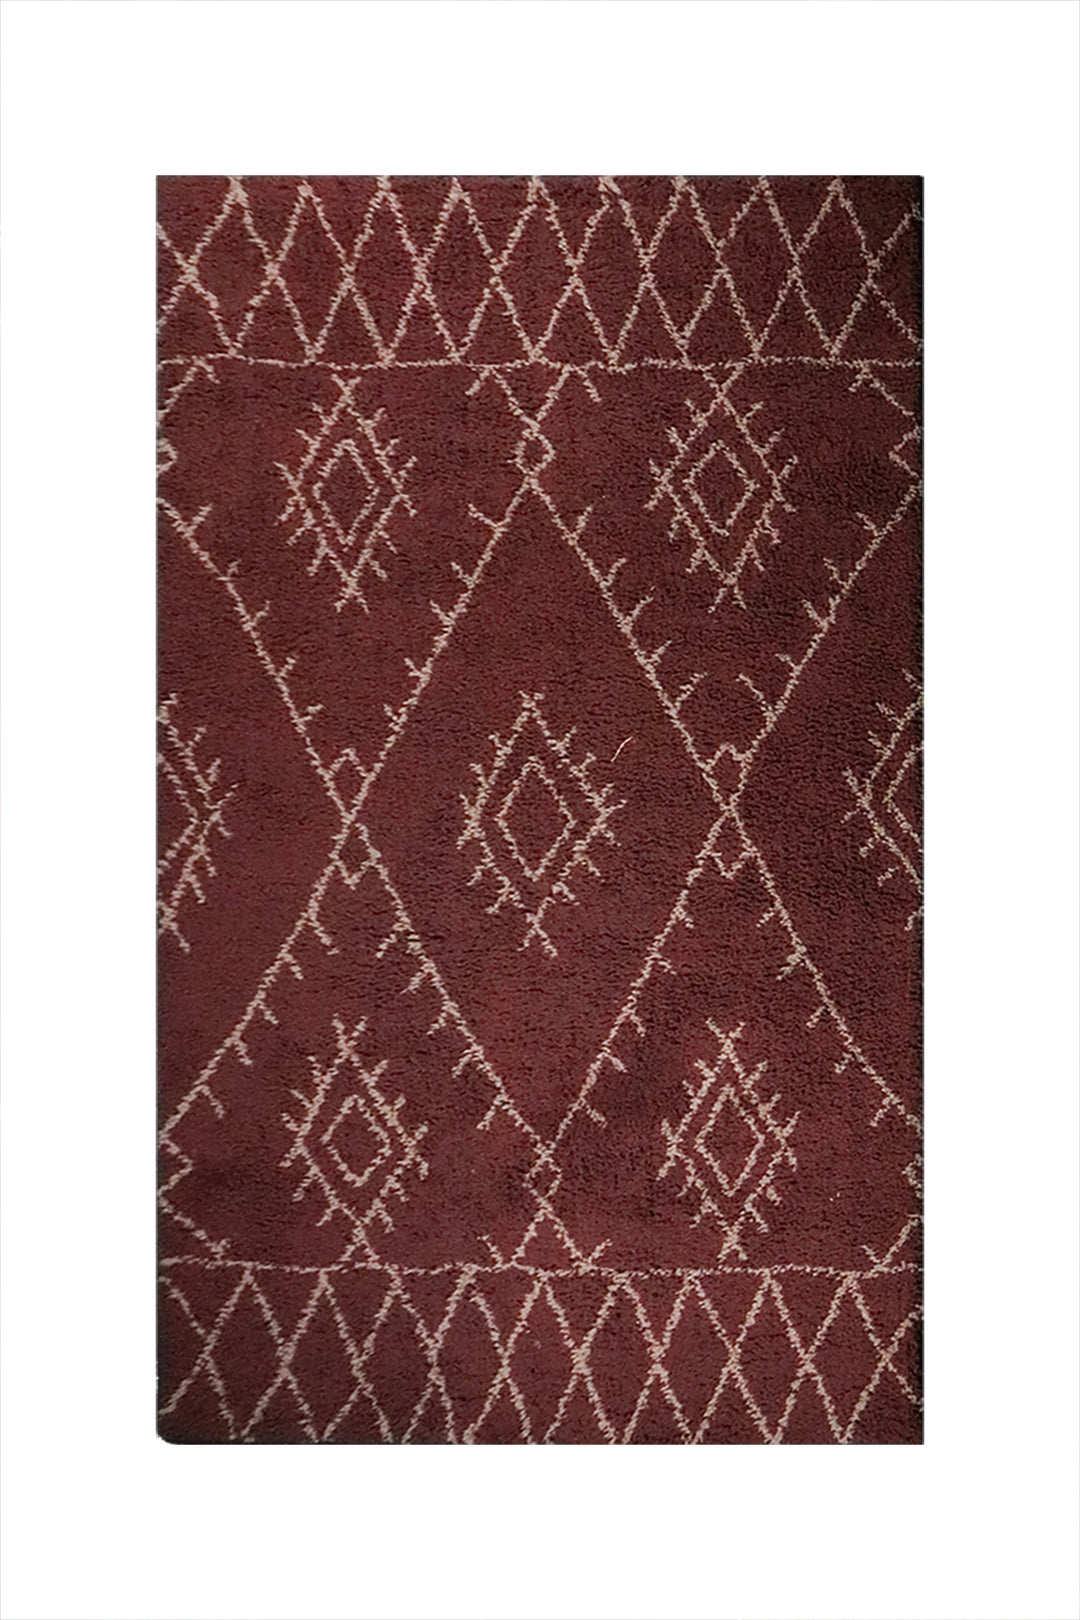 Turkish Modern Festival WD Rug - 5.2 x 7.5 FT - Red- Sleek and Minimalist for Chic Interiors